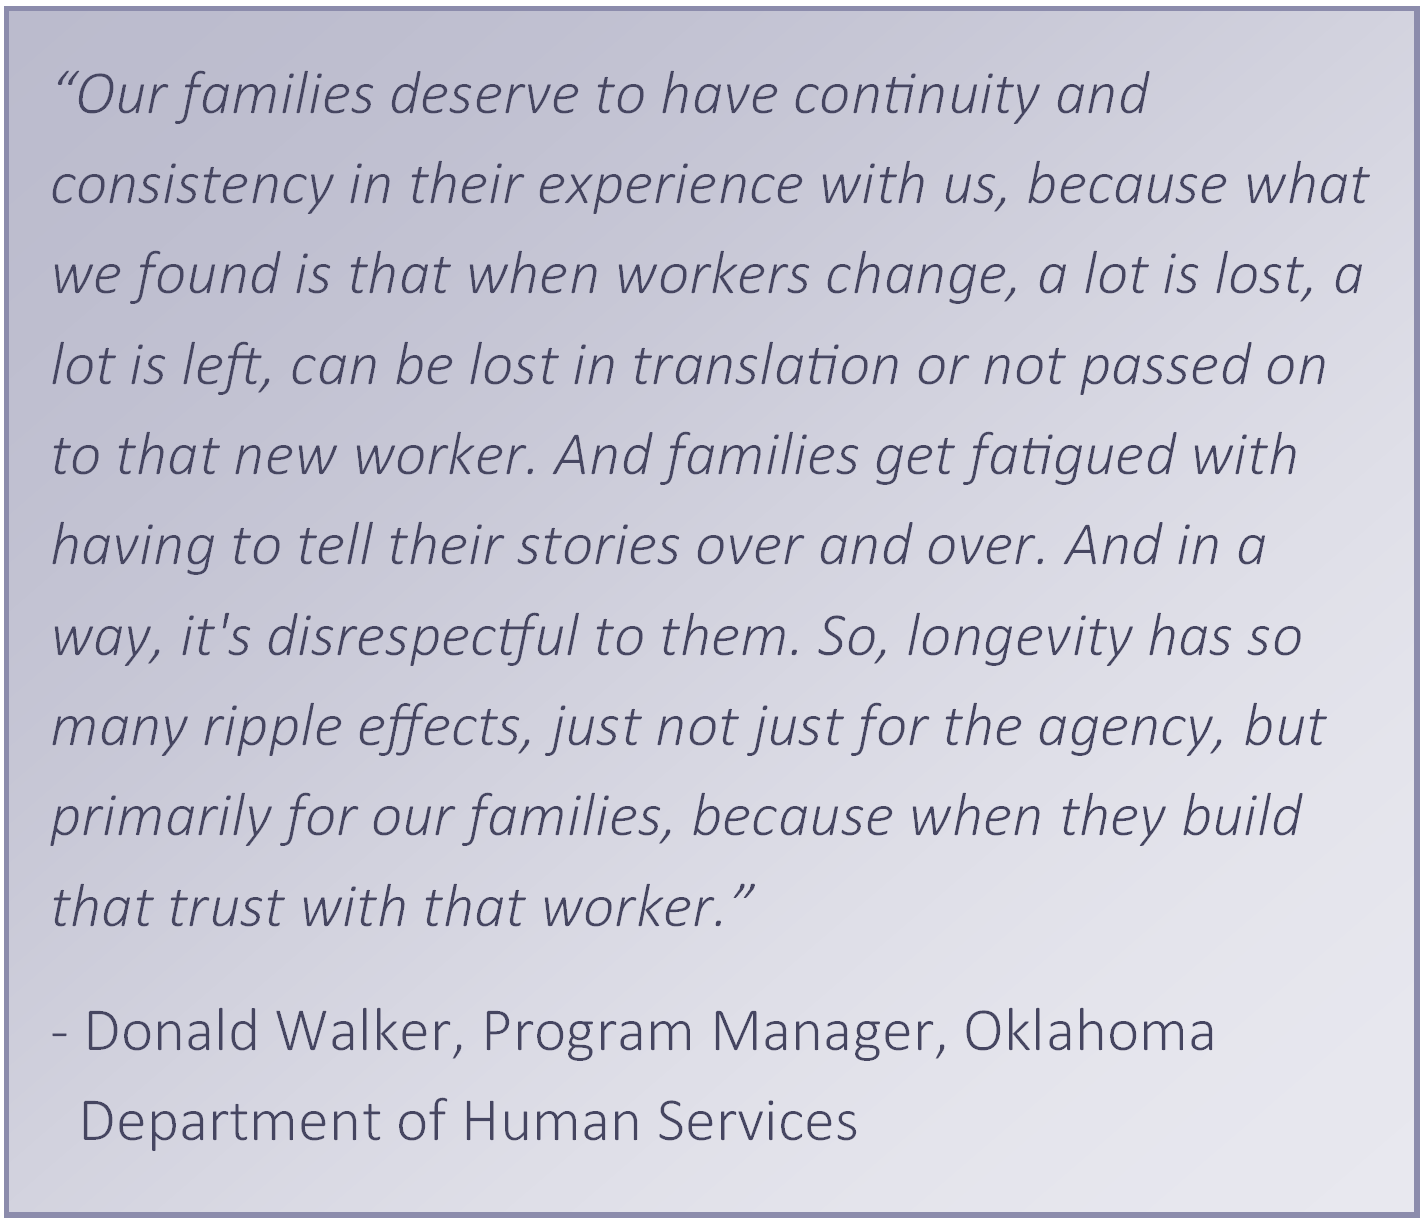 “Our families deserve to have continuity and consistency in their experience with us, because what we found is that when workers change, a lot is lost, a lot is left, can be lost in translation or not passed on to that new worker. And families get fatigue